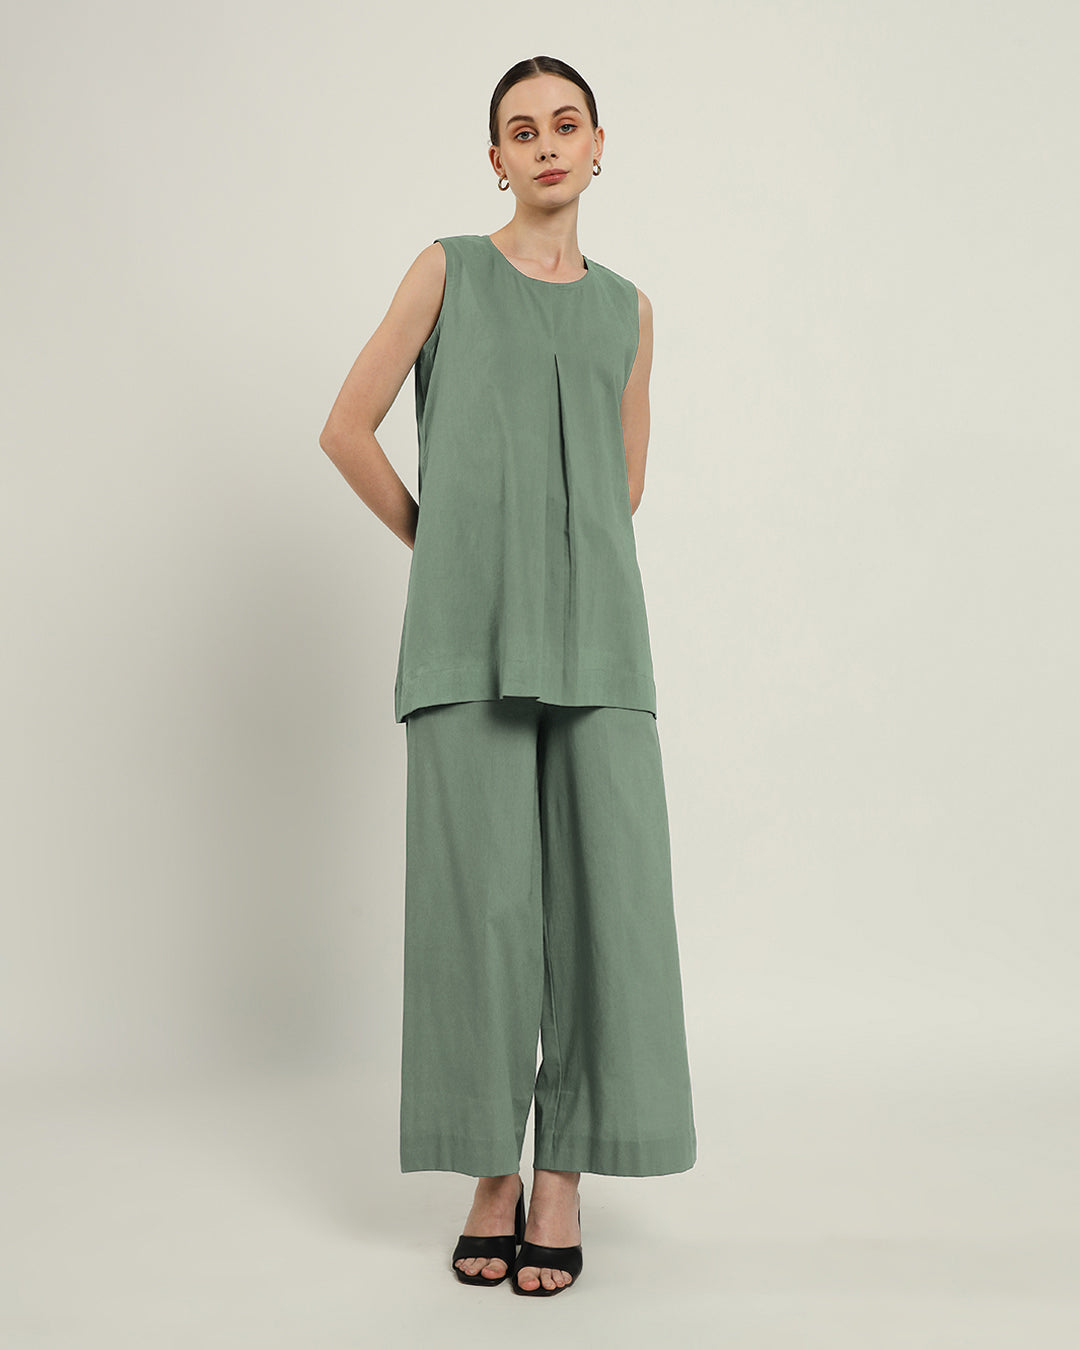 Mint Pleated A Line Top (Without Bottoms)